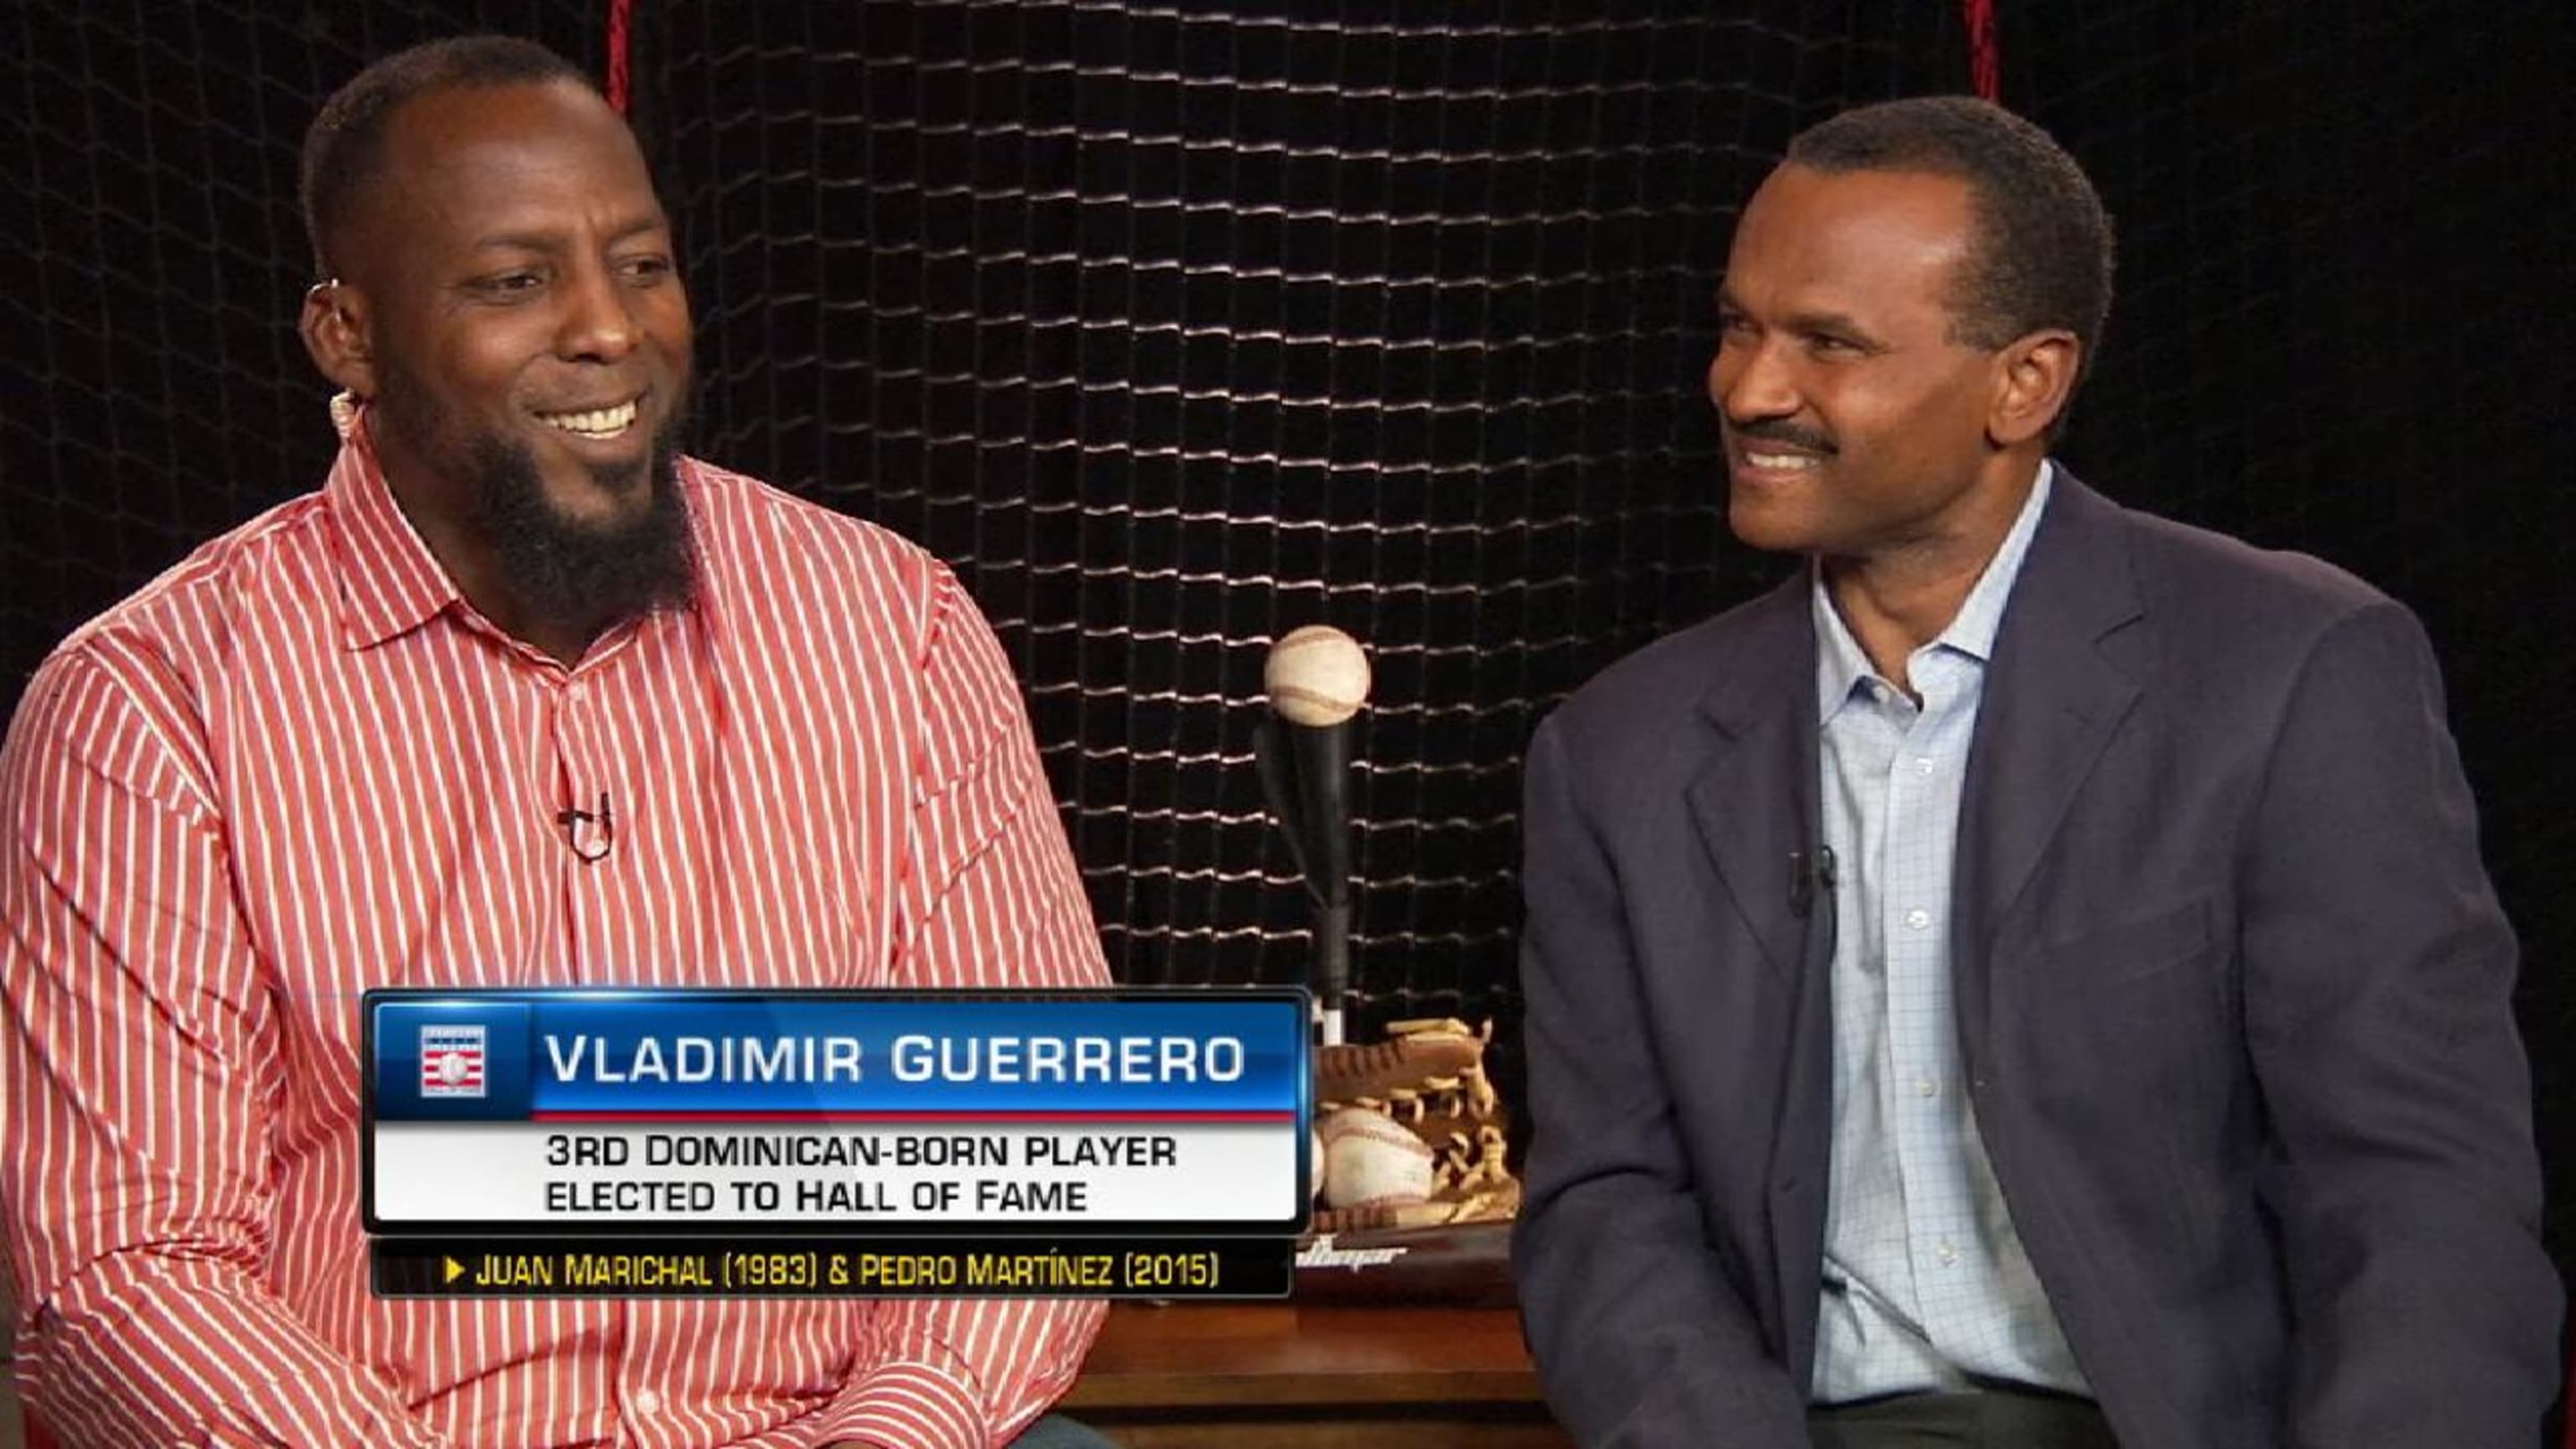 As Vladimir Guerrero eyes Hall of Fame, his family tree